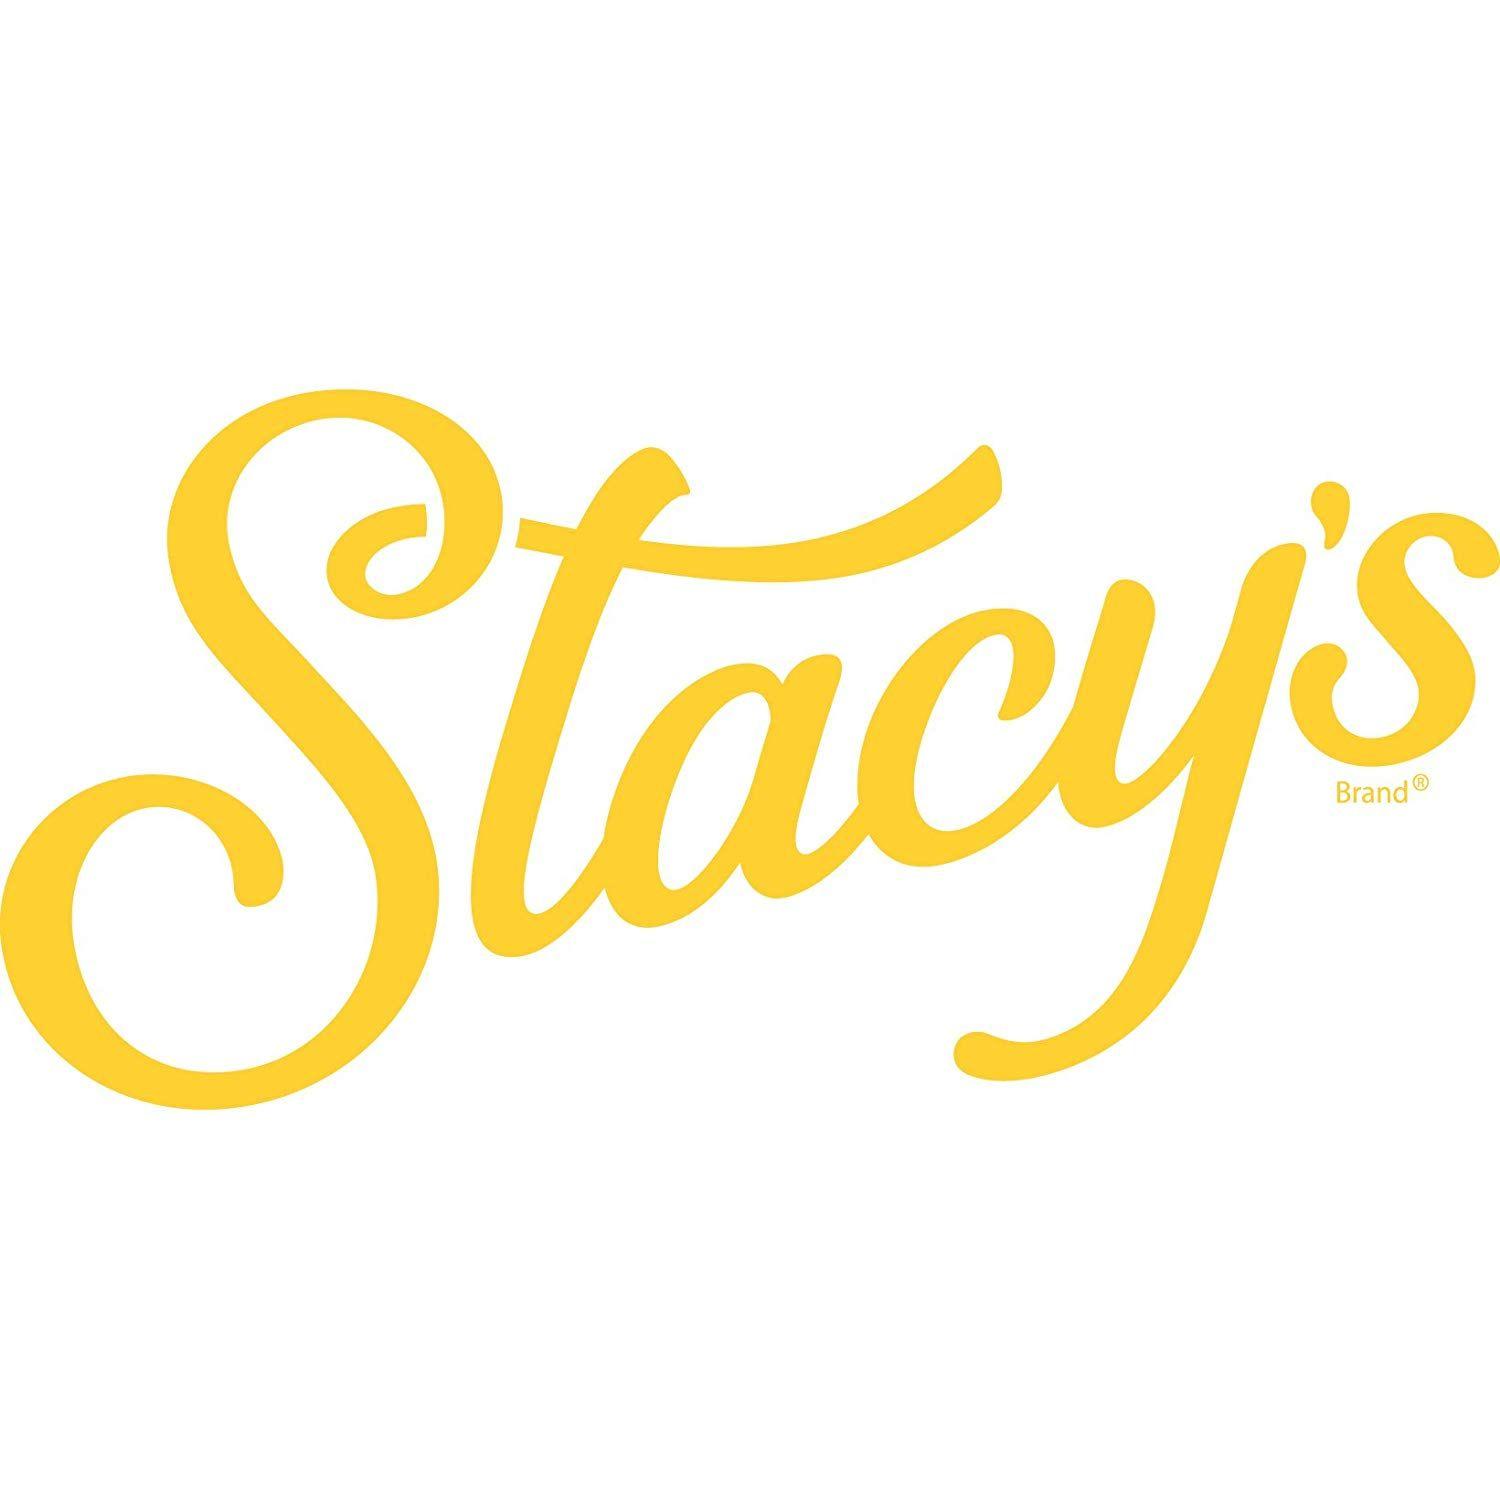 Stacy Logo - Stacy's Pita Thins, Simply Naked, 6.75 Ounce Bag